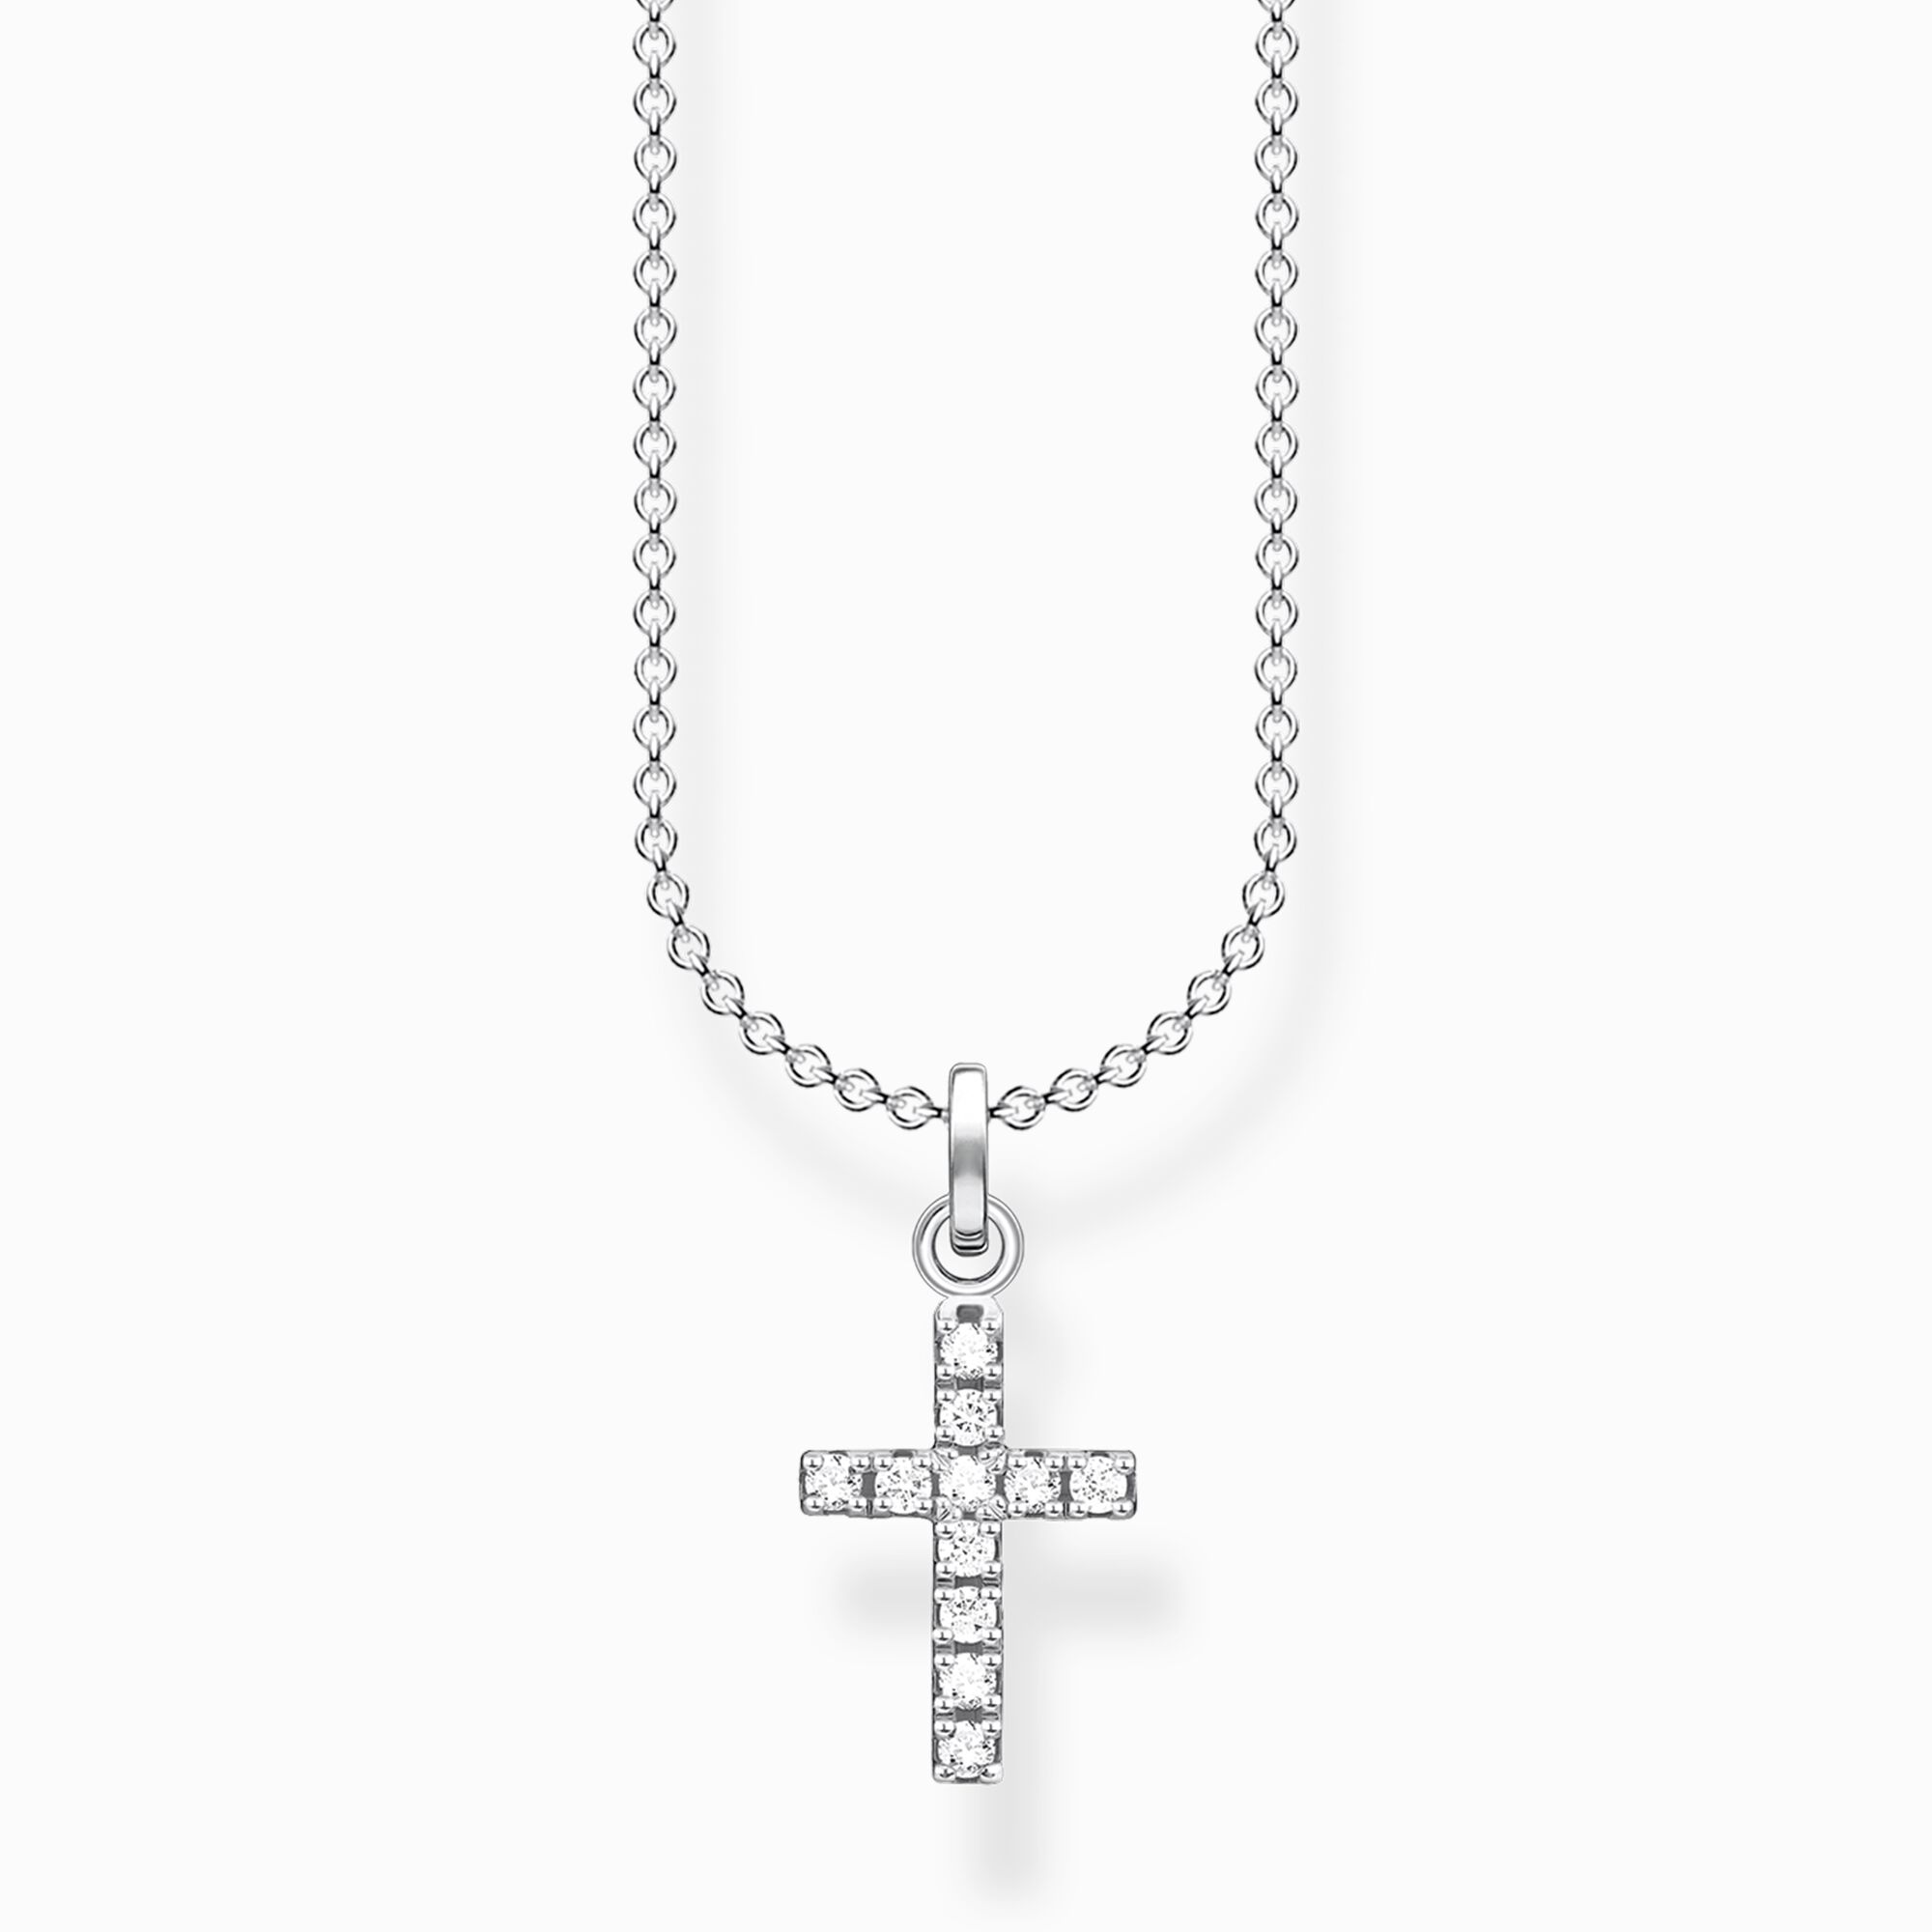 Necklace cross pav&eacute; from the Charming Collection collection in the THOMAS SABO online store